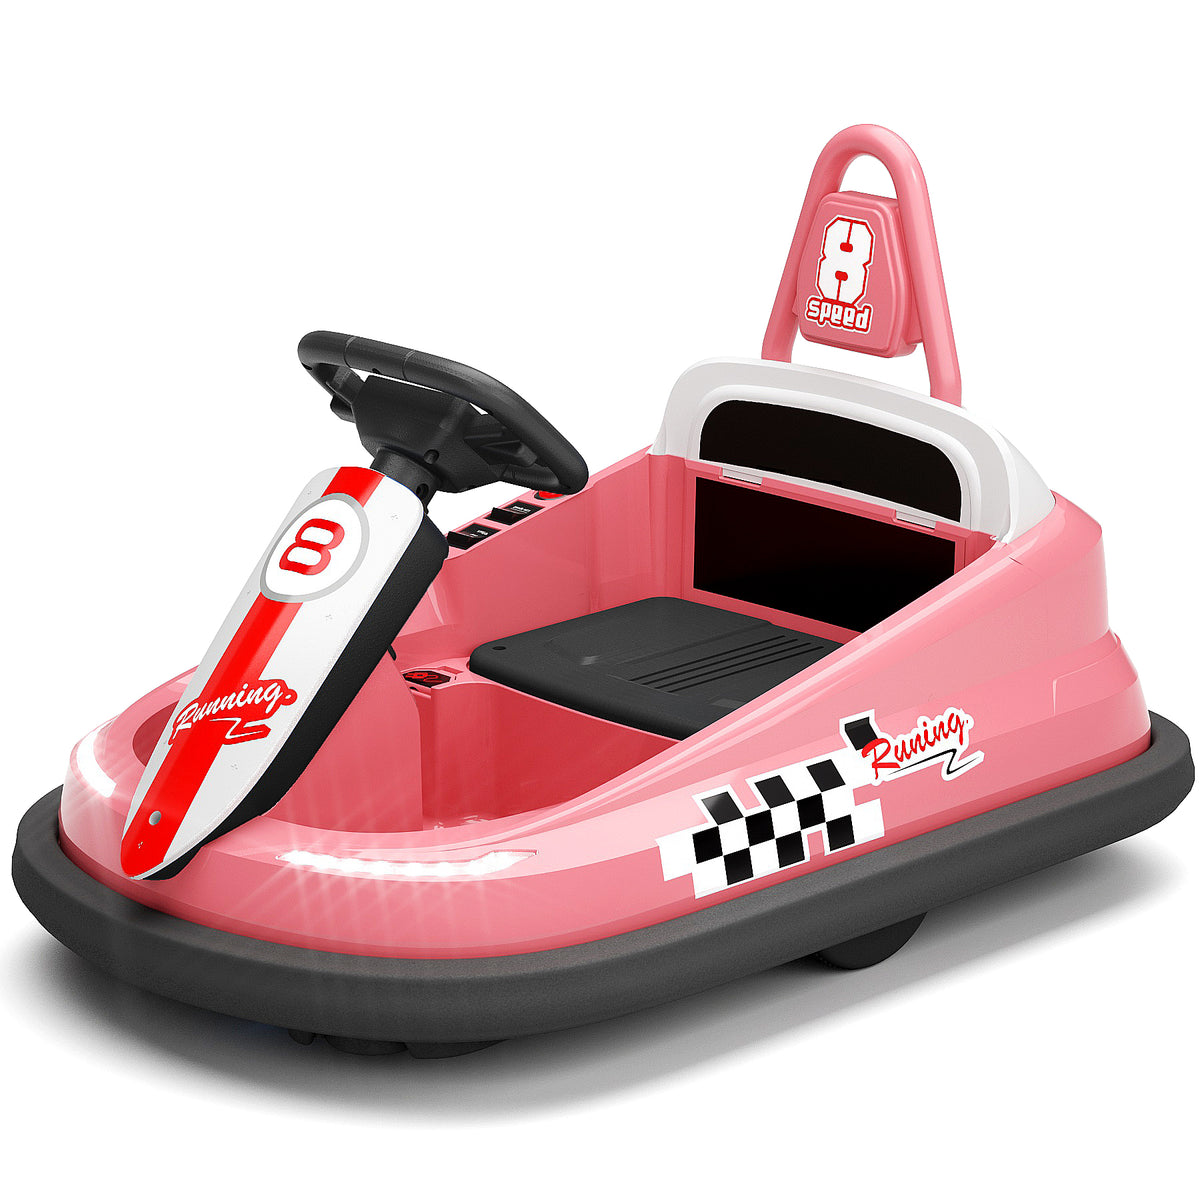 XJD 360° Spinning Toddlers Battery Powered Electric Bumper Cars for Kids Age 1.5+, Pink